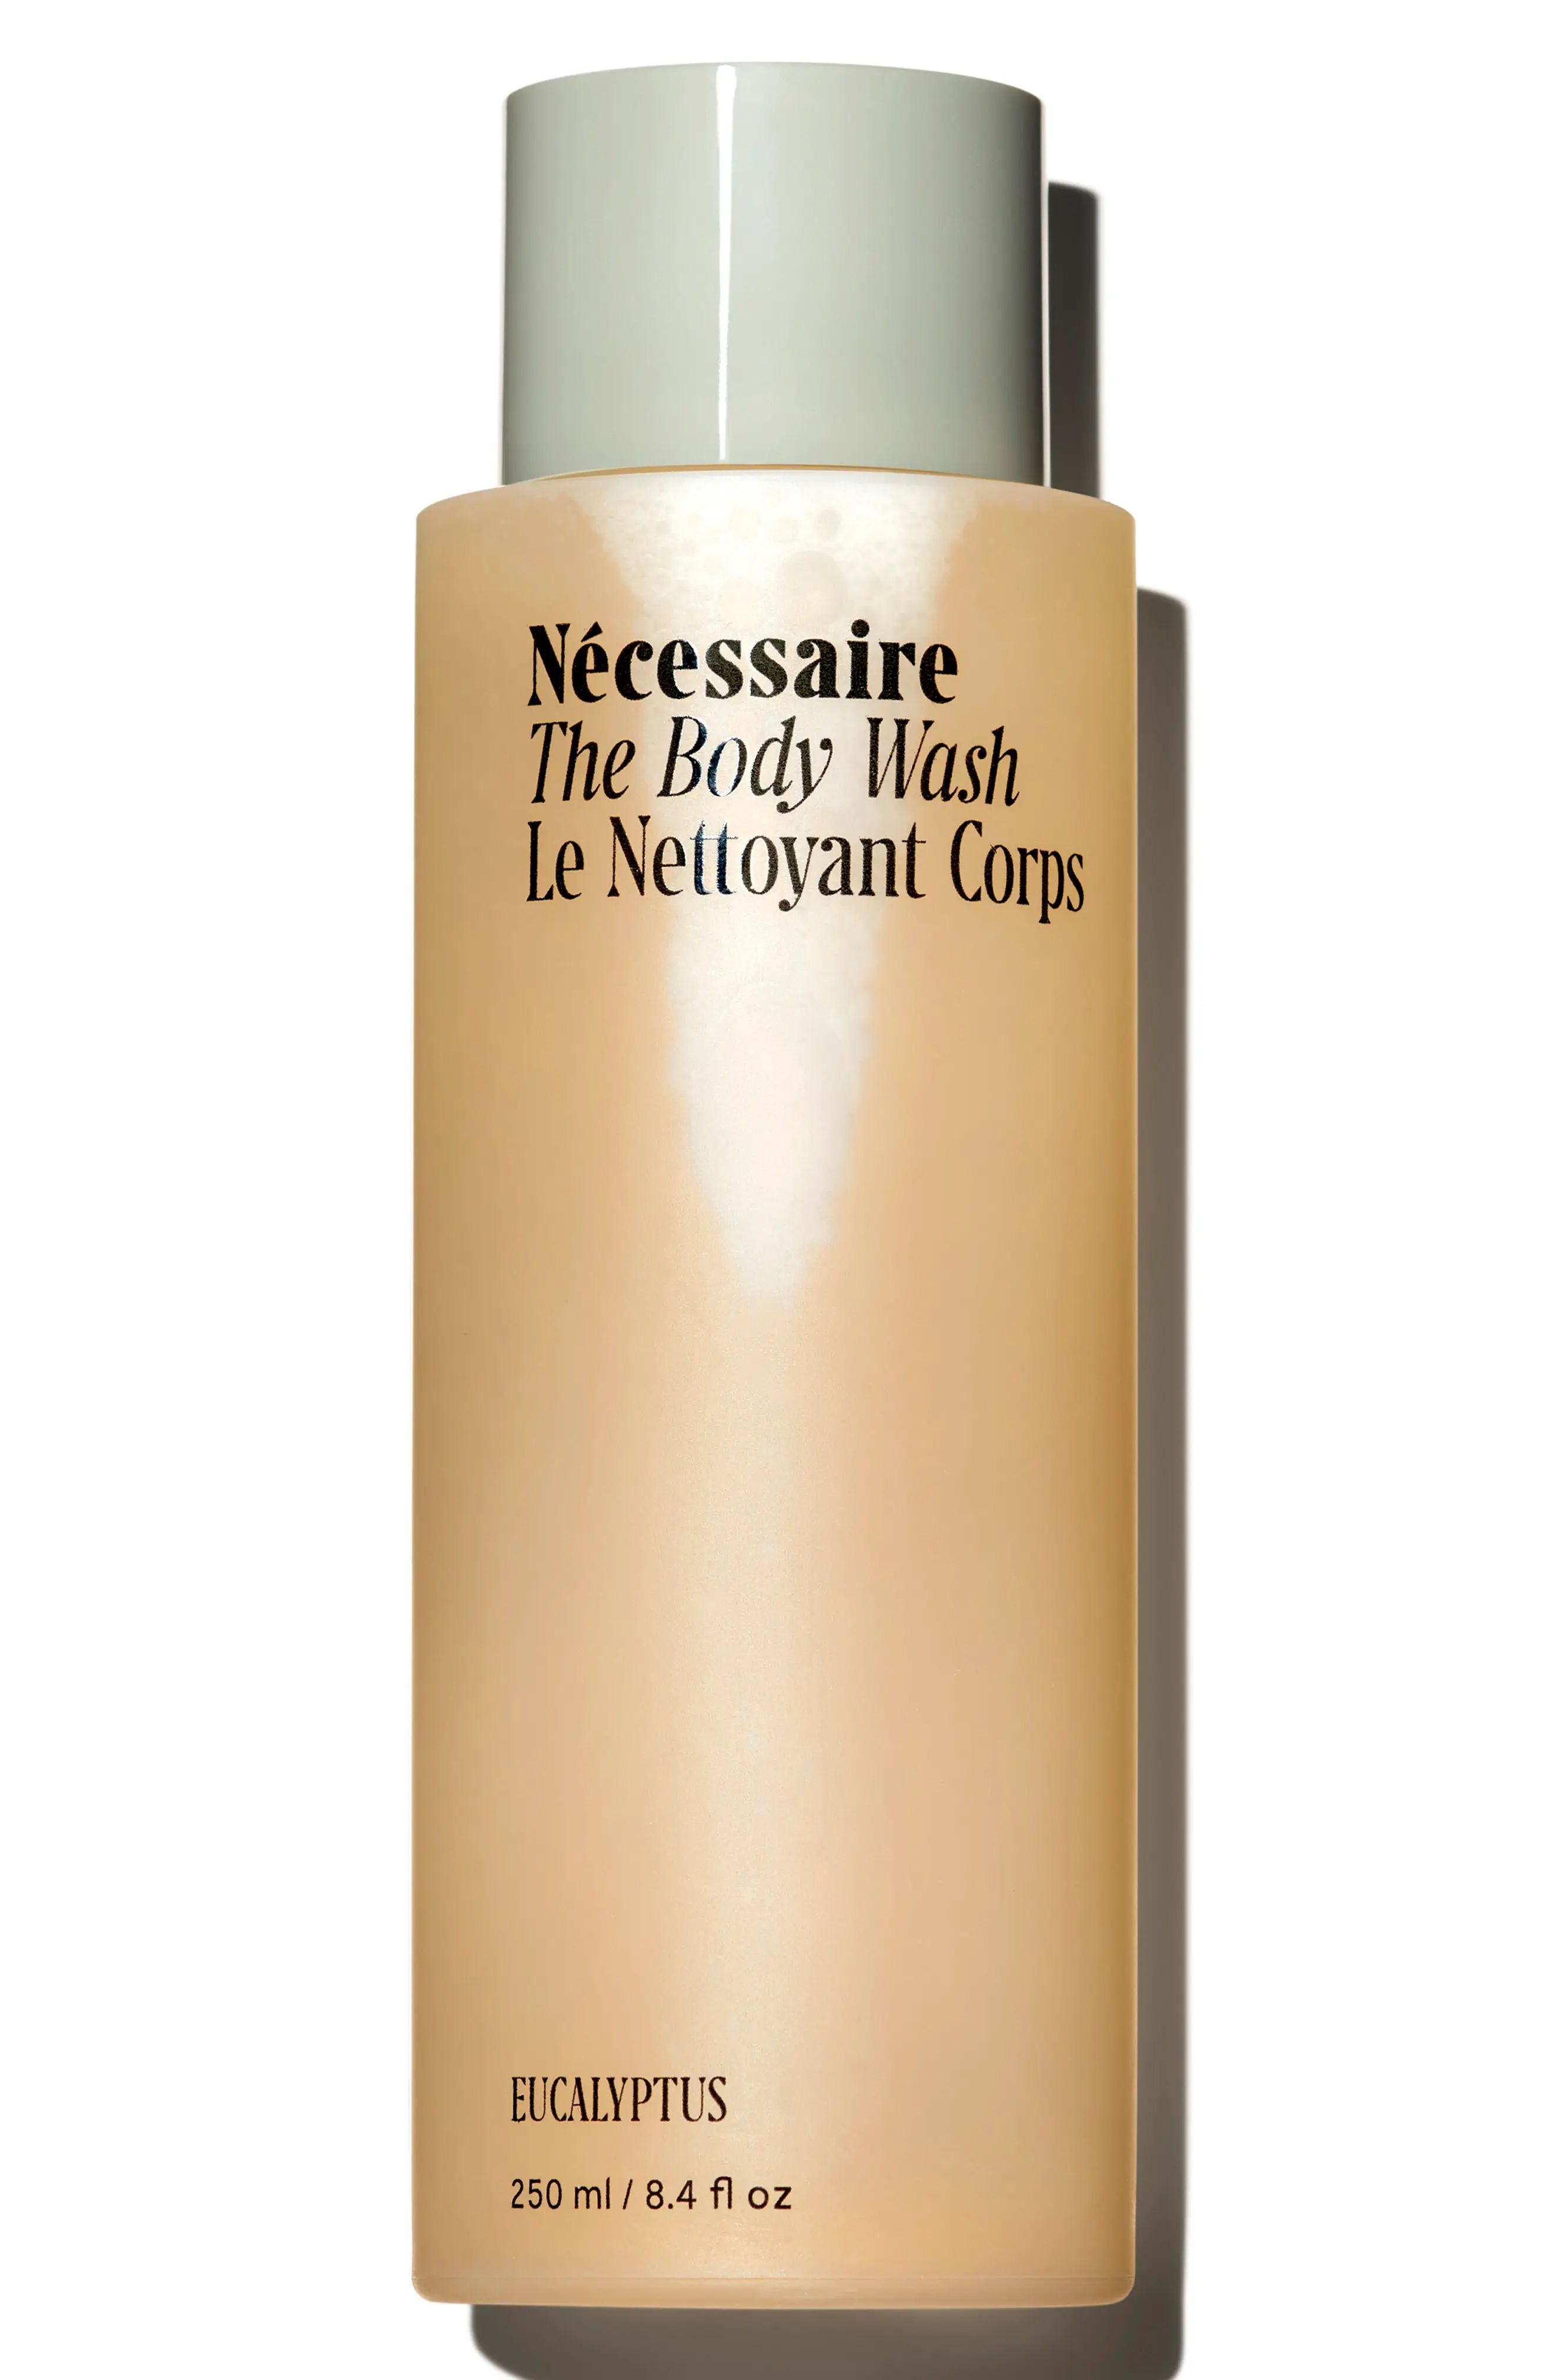 Necessaire The Body Wash in Eucalyptus at Nordstrom | Nordstrom